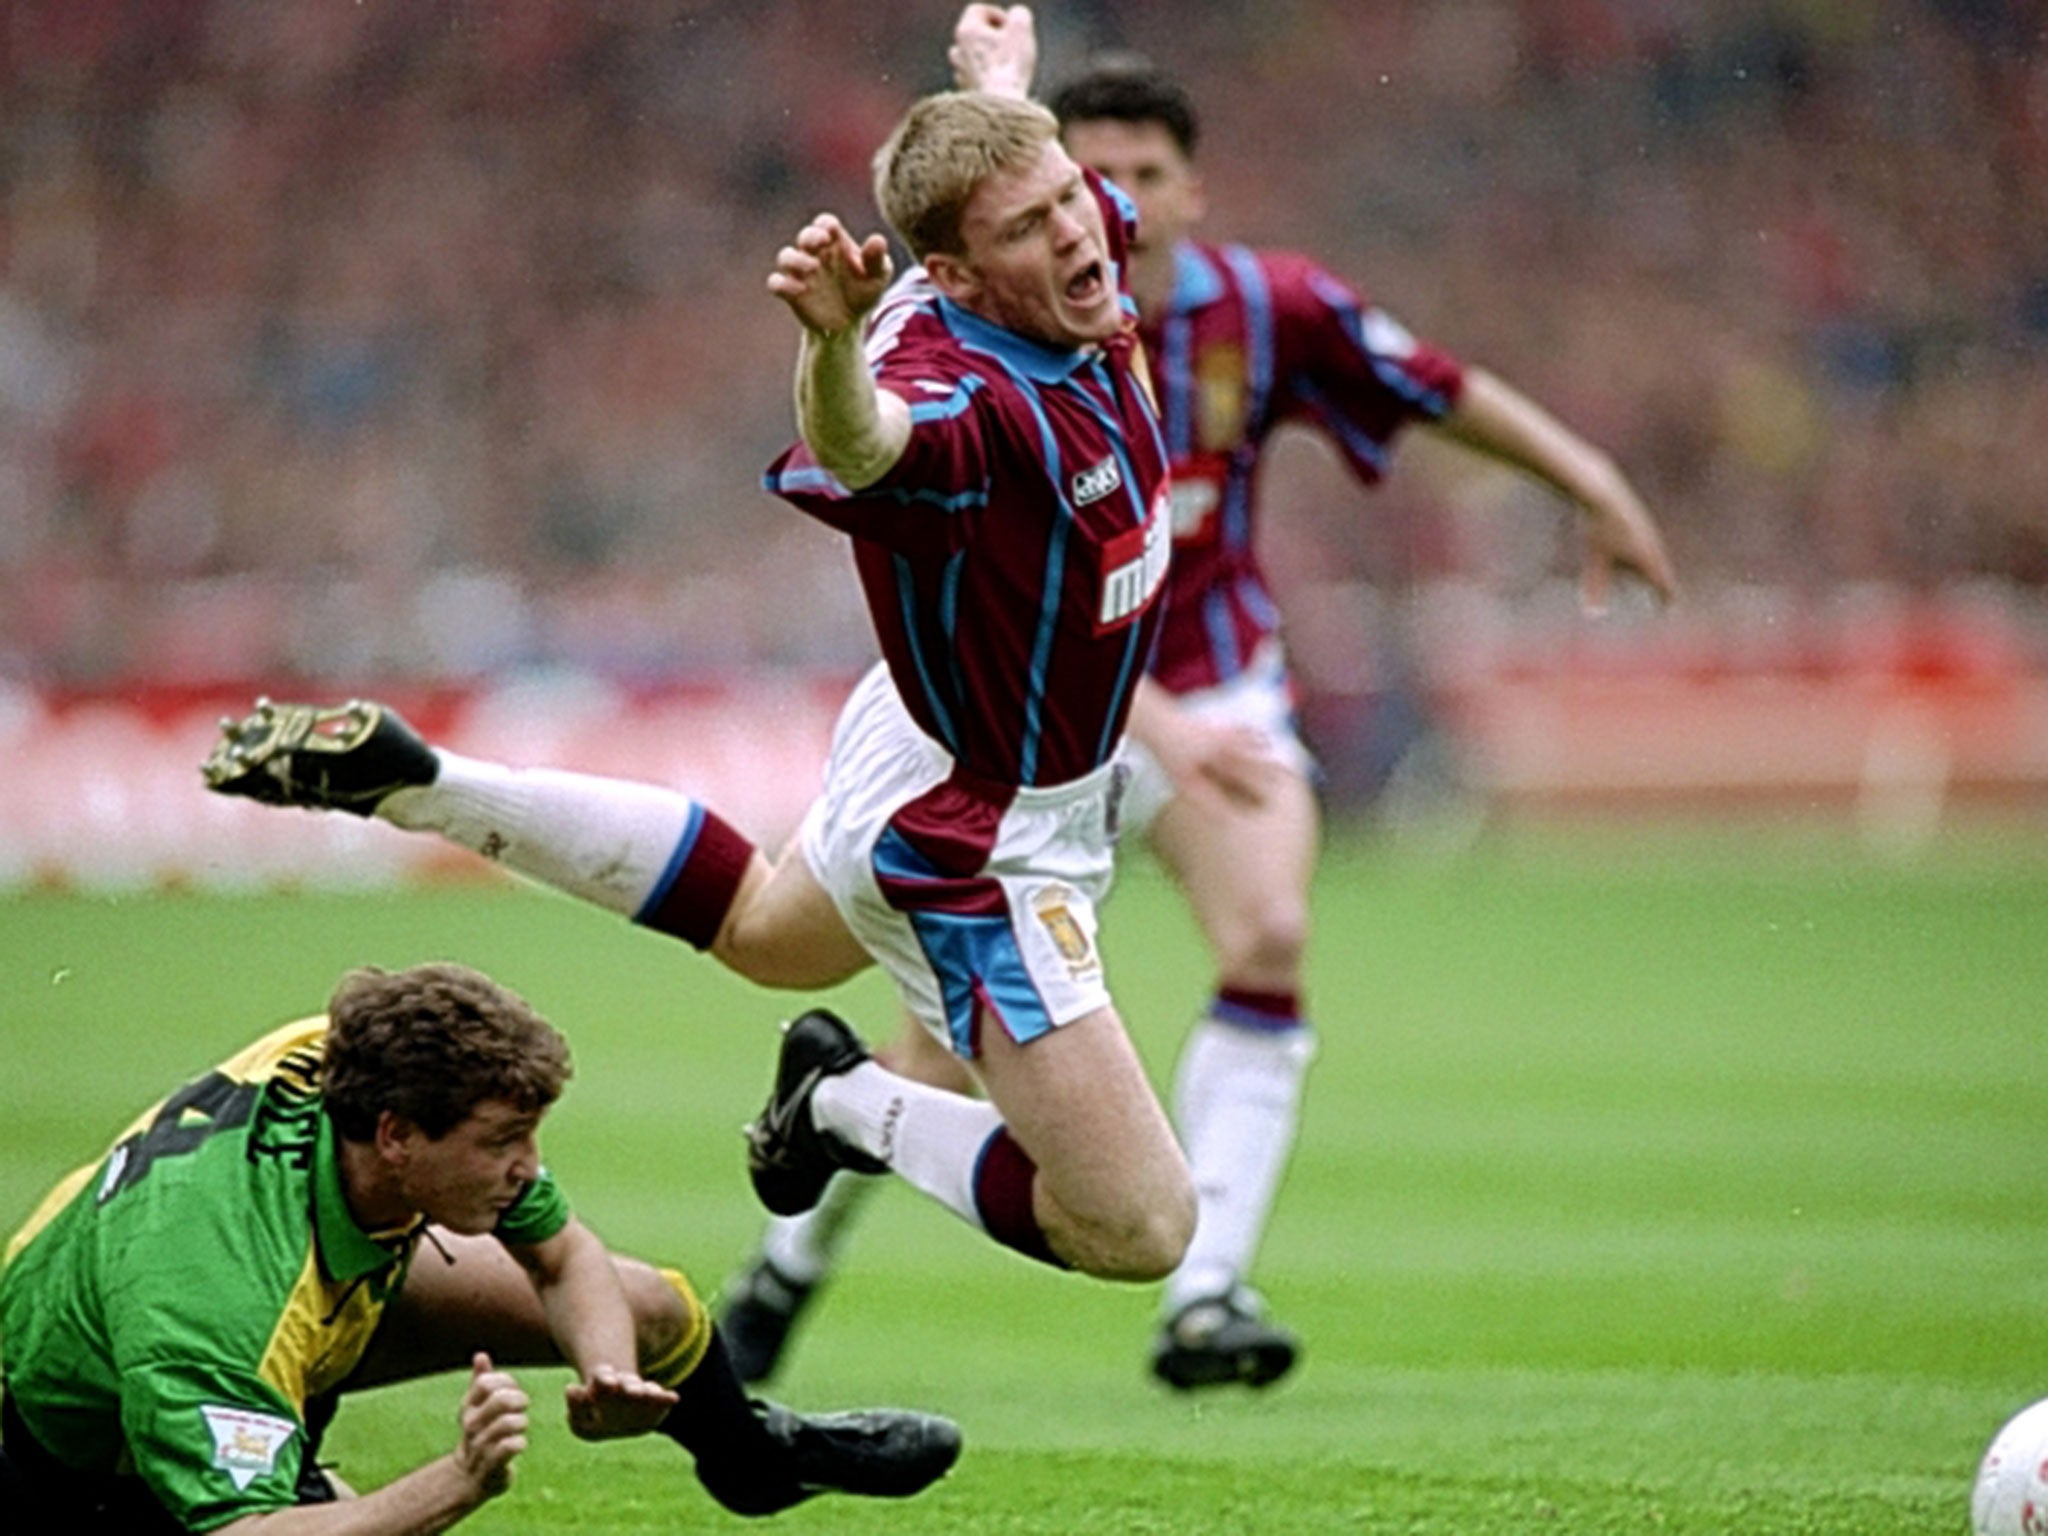 Graham Fenton is tackled by Manchester United’s Steve Bruce at Wembley in the 1994 League Cup final, which Aston Villa won 3-1